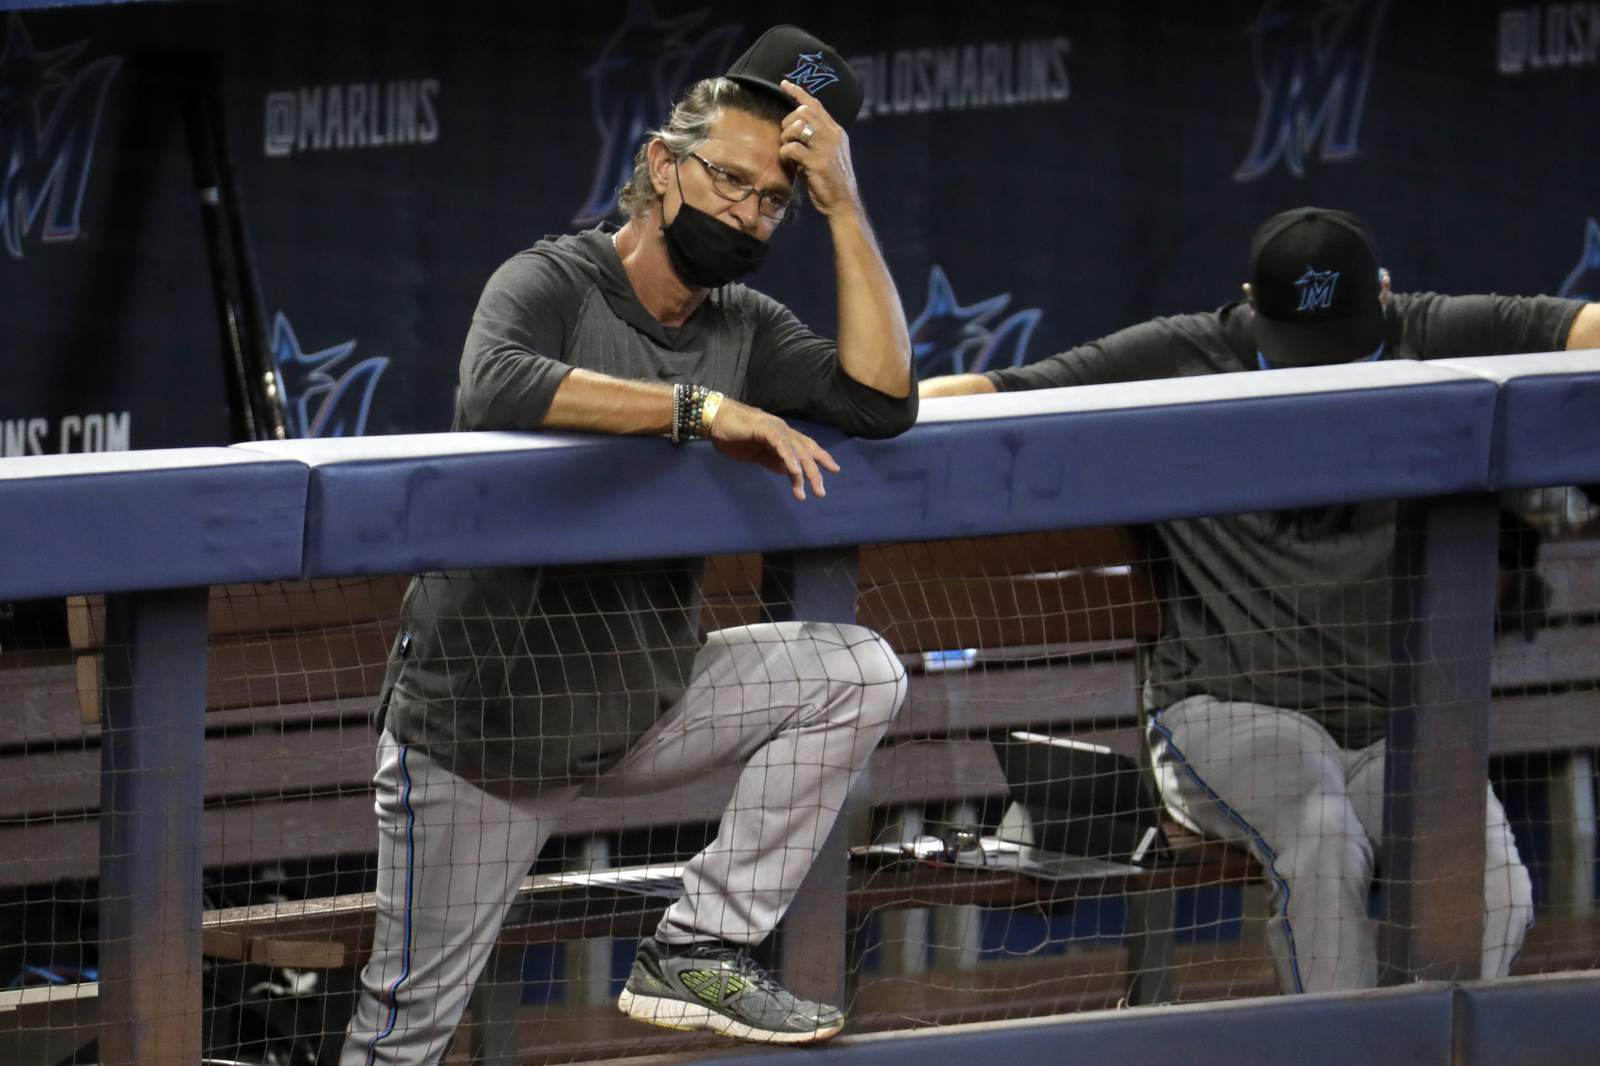 Marlins join other MLB teams in experimenting with pumped-in crowd noise